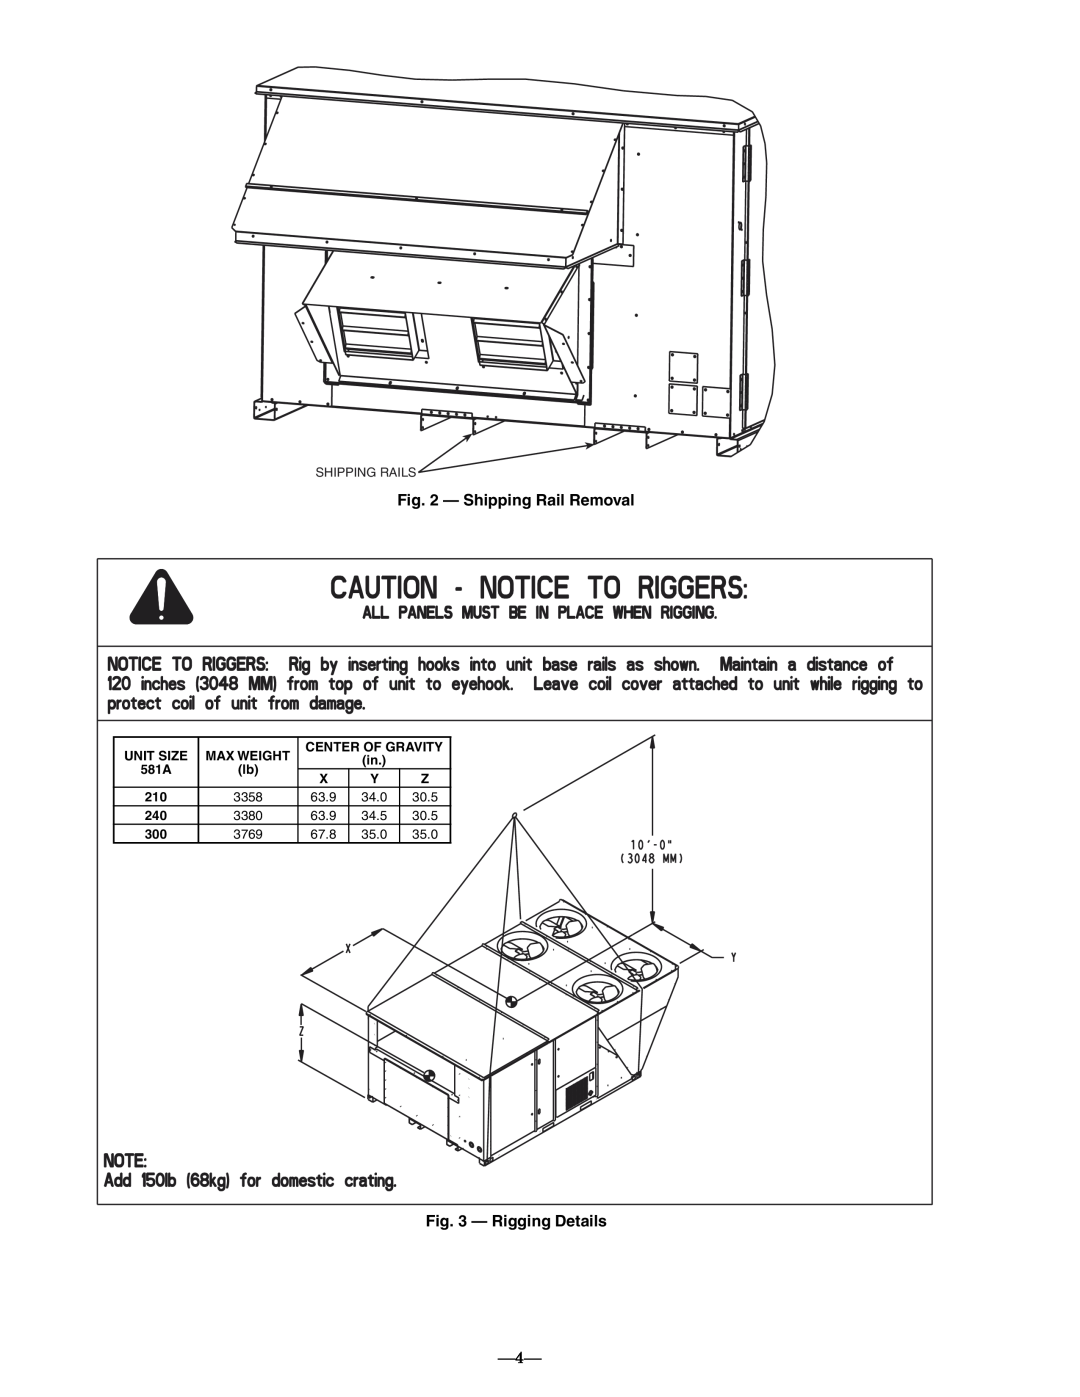 Bryant 581A operation manual Shipping Rail Removal, Rigging Details, Shipping Rails 